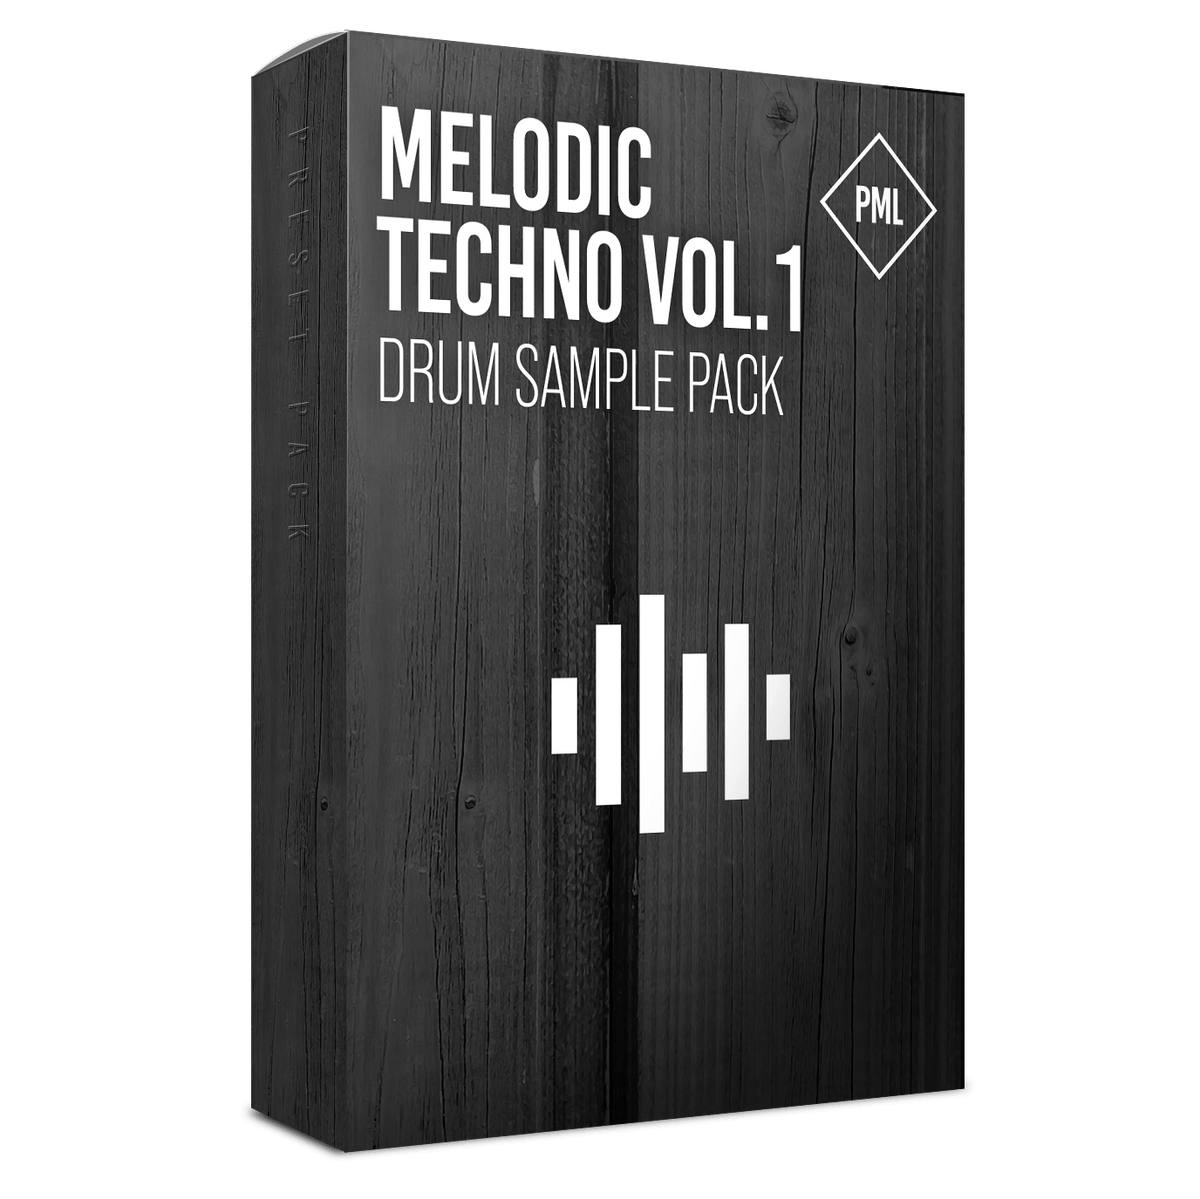 Melodic Techno Vol.1 - Drum Sample Pack Product Box